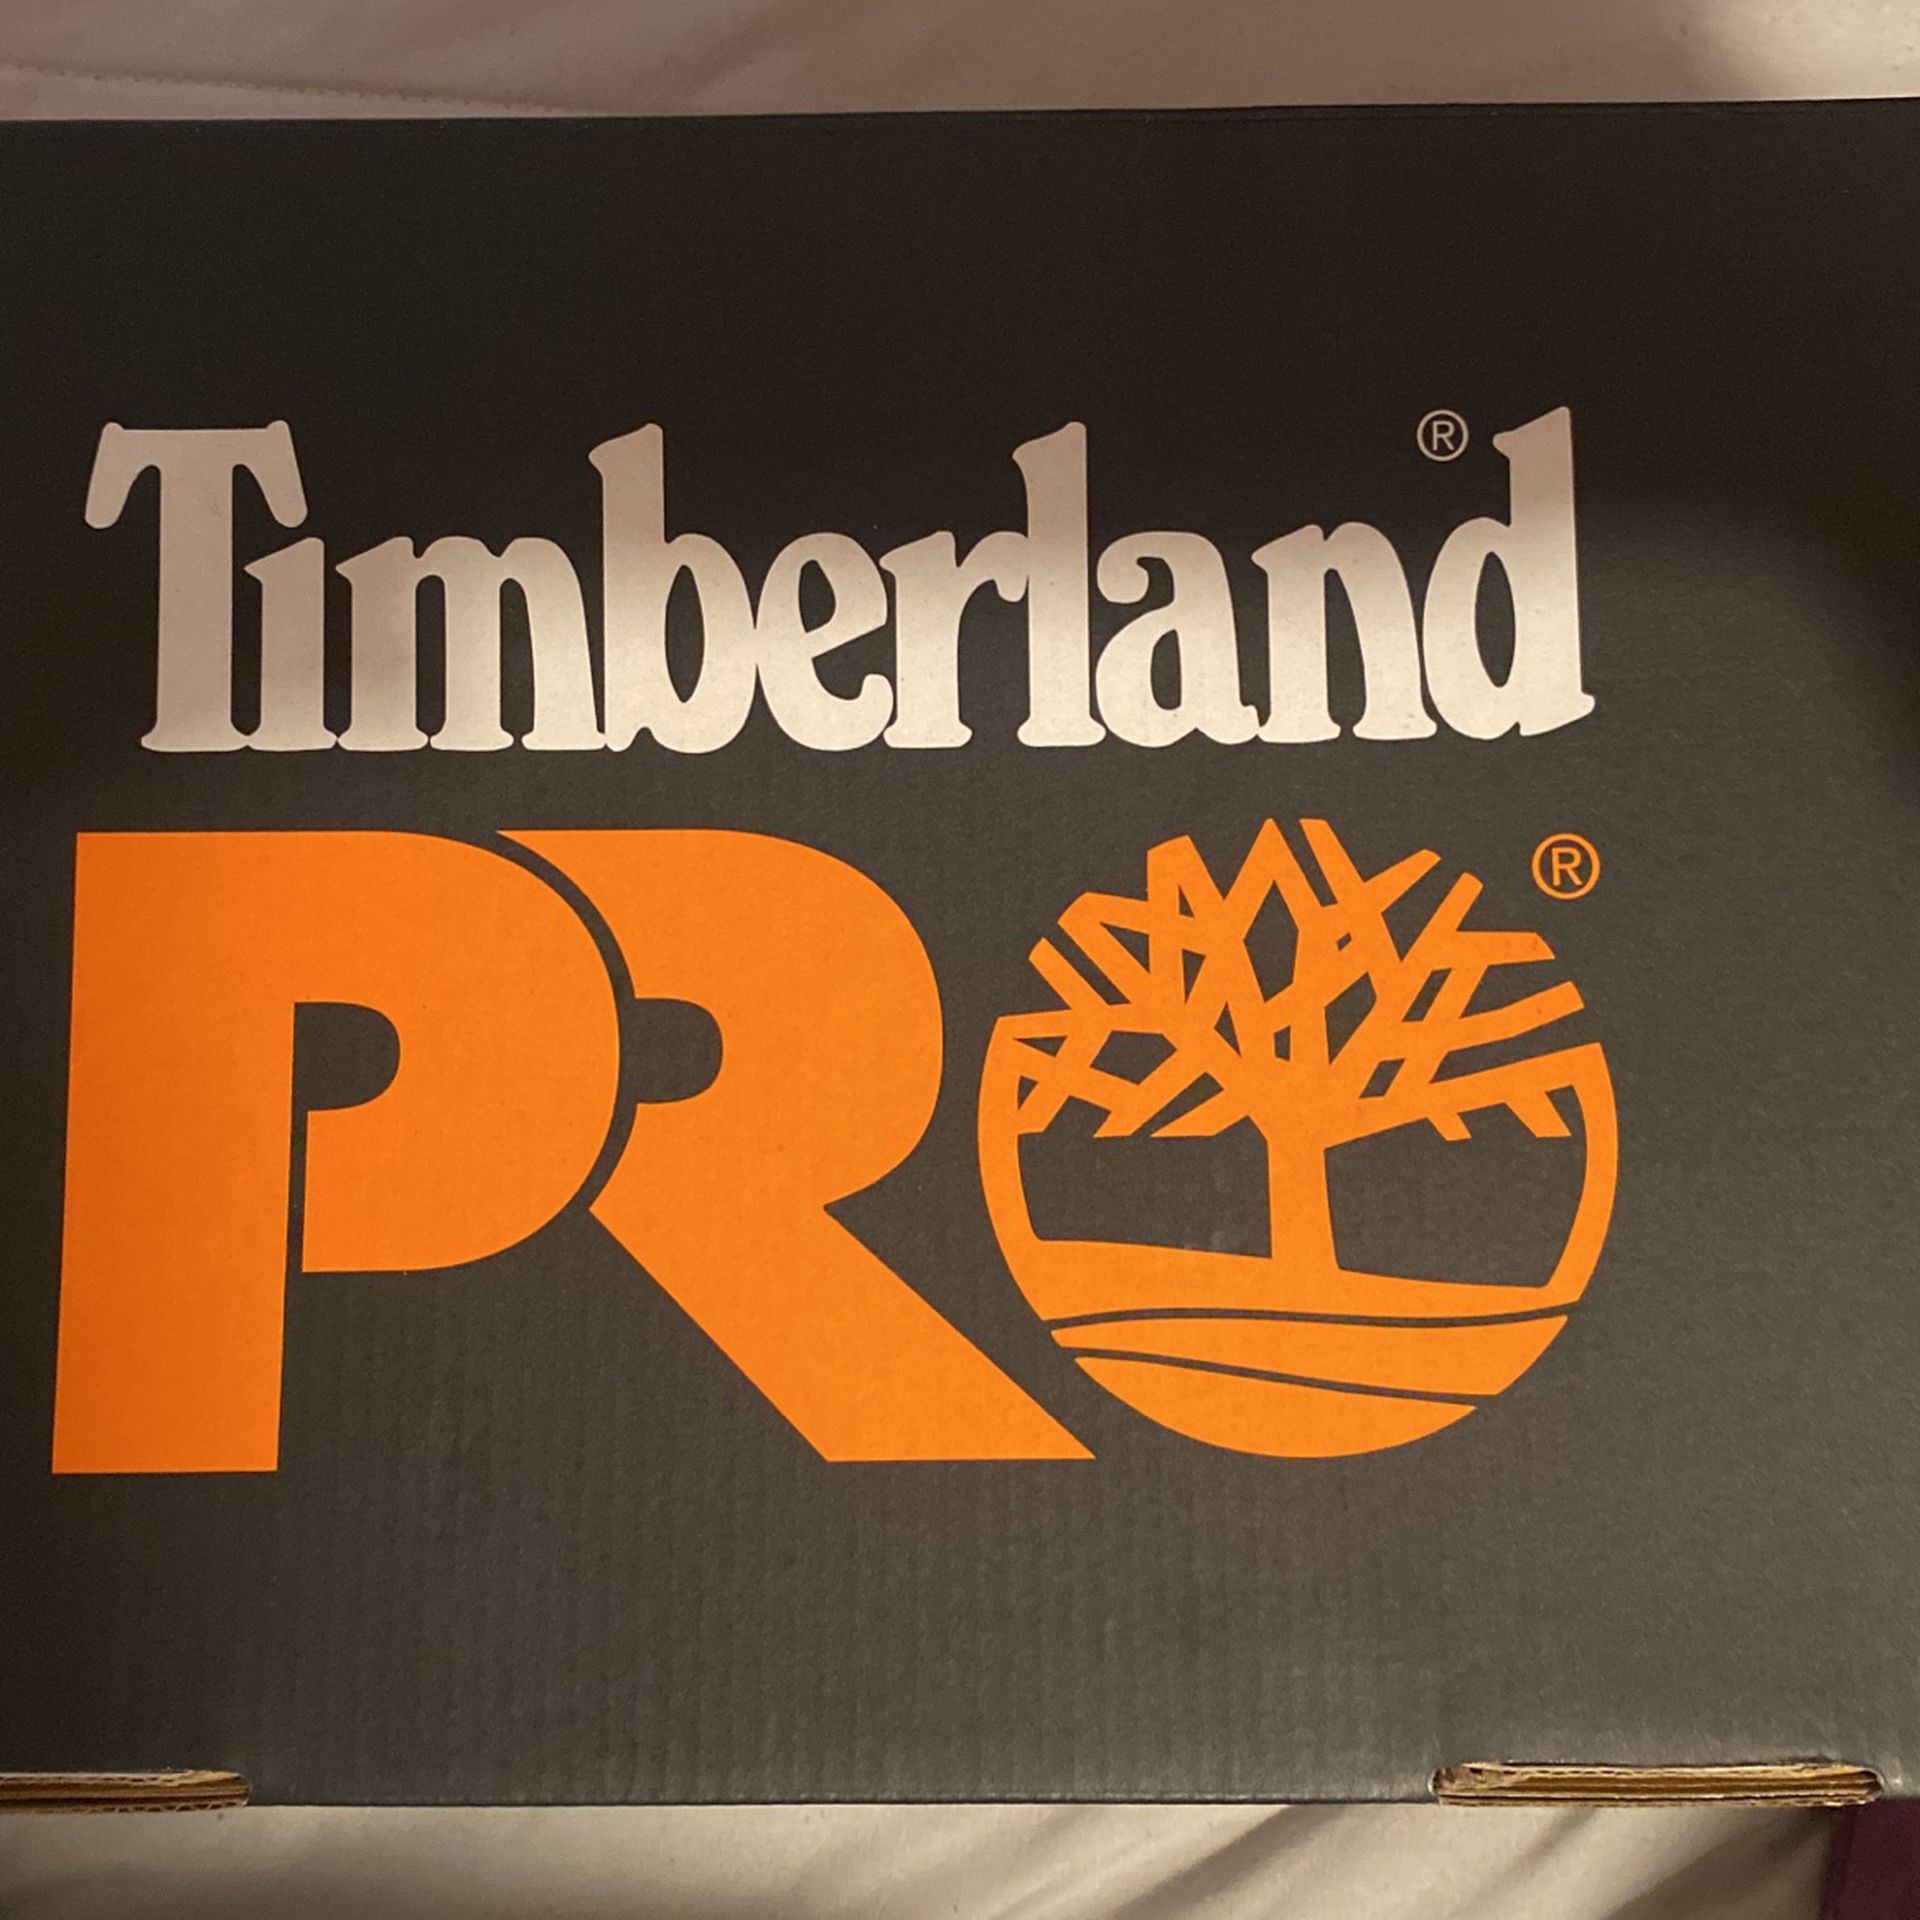 Steel Toe Timberland Shoes